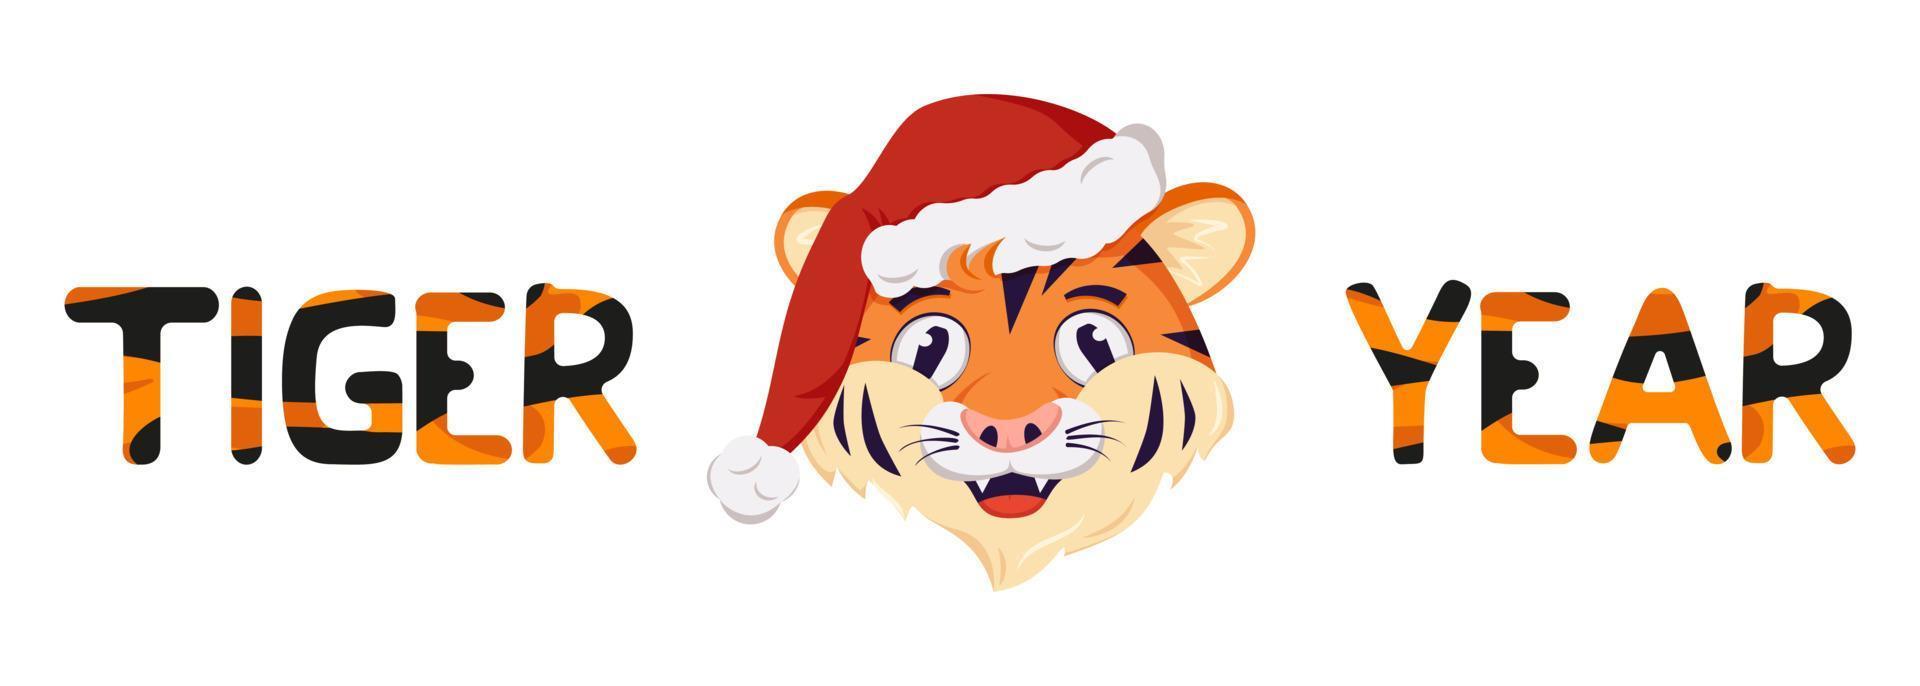 Happy tiger, symbol of New Year in red Christmas Santa hat. Wild animals of Africa, face with joyful emotion, holiday decoration with orange striped lettering vector